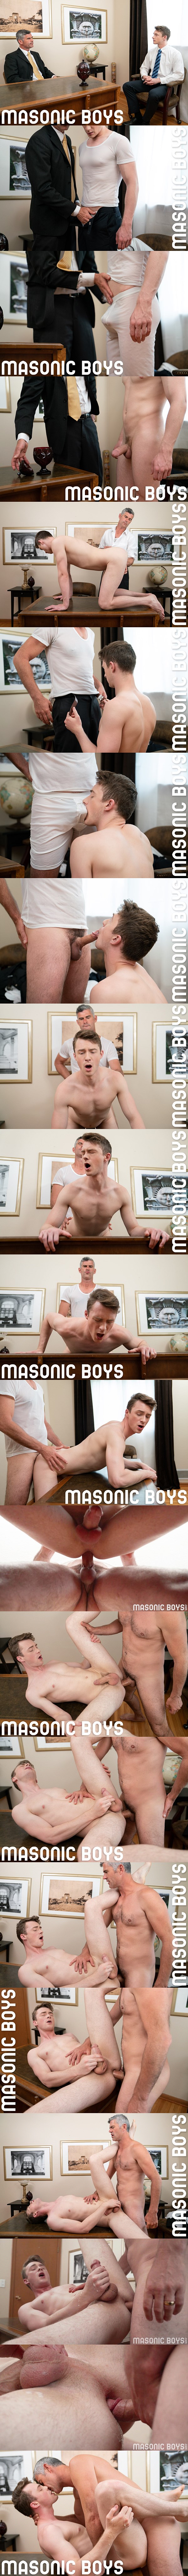 Masonicboys - handsome hung daddy Master Oaks (aka President Oaks) barebacks twink Cole Blue before he fucks the cum out of Cole and creampies him in The Calling 02